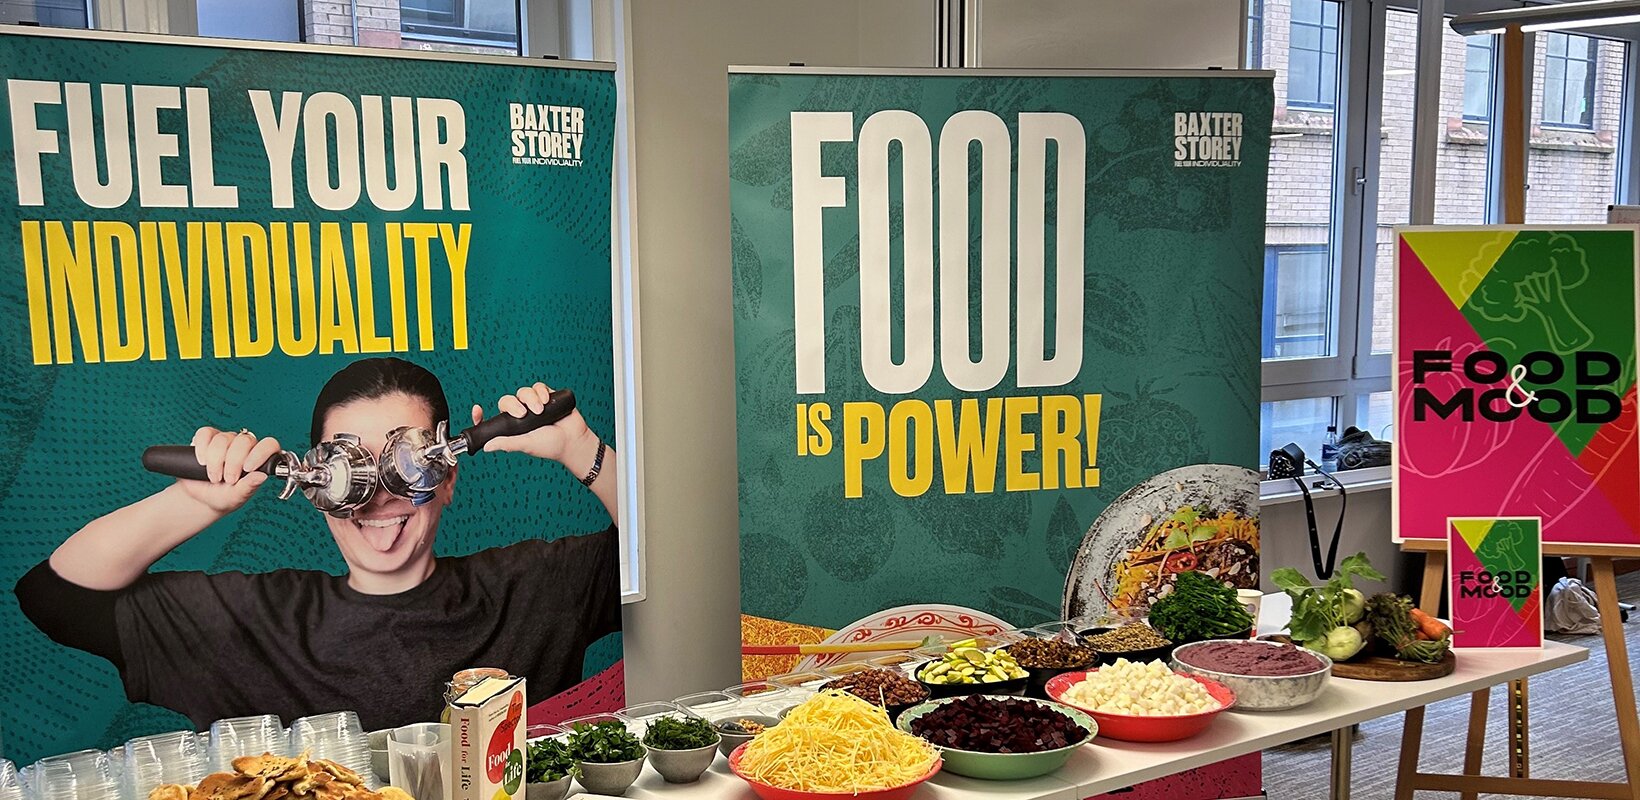 BaxterStorey’s Food & Mood campaign nourishes both the mind and body